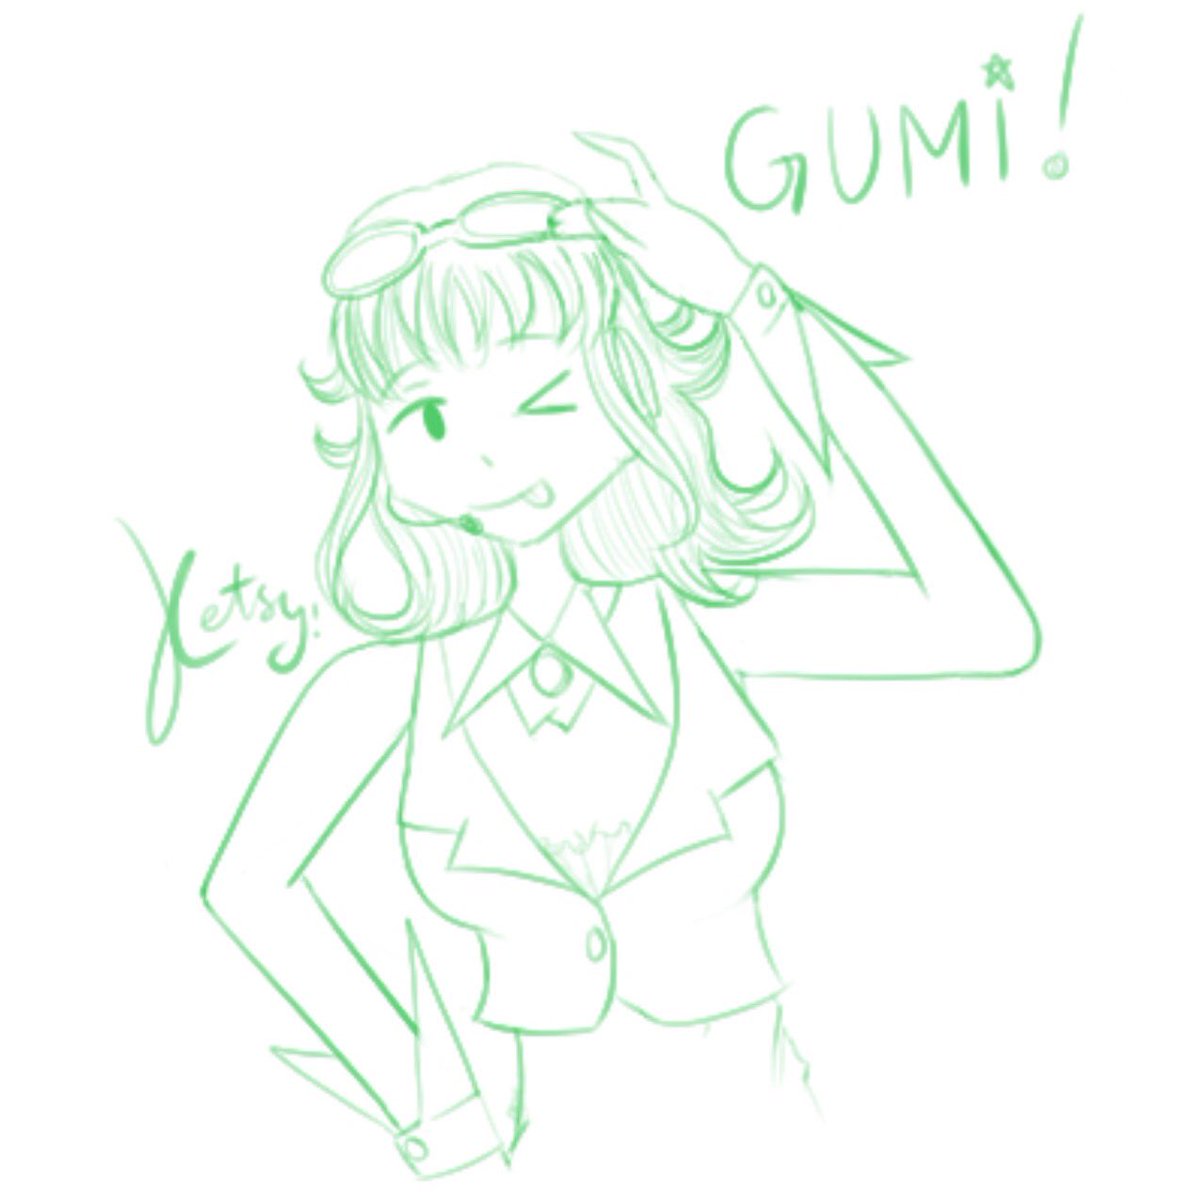 hiya , sorry for not posting one yesterday but heres another doodle i did !!! ^_^ 
also what do we think of the new signature ? i might use it for main acc and keep miqu for my art acc :3

#GUMI #VOCALOID